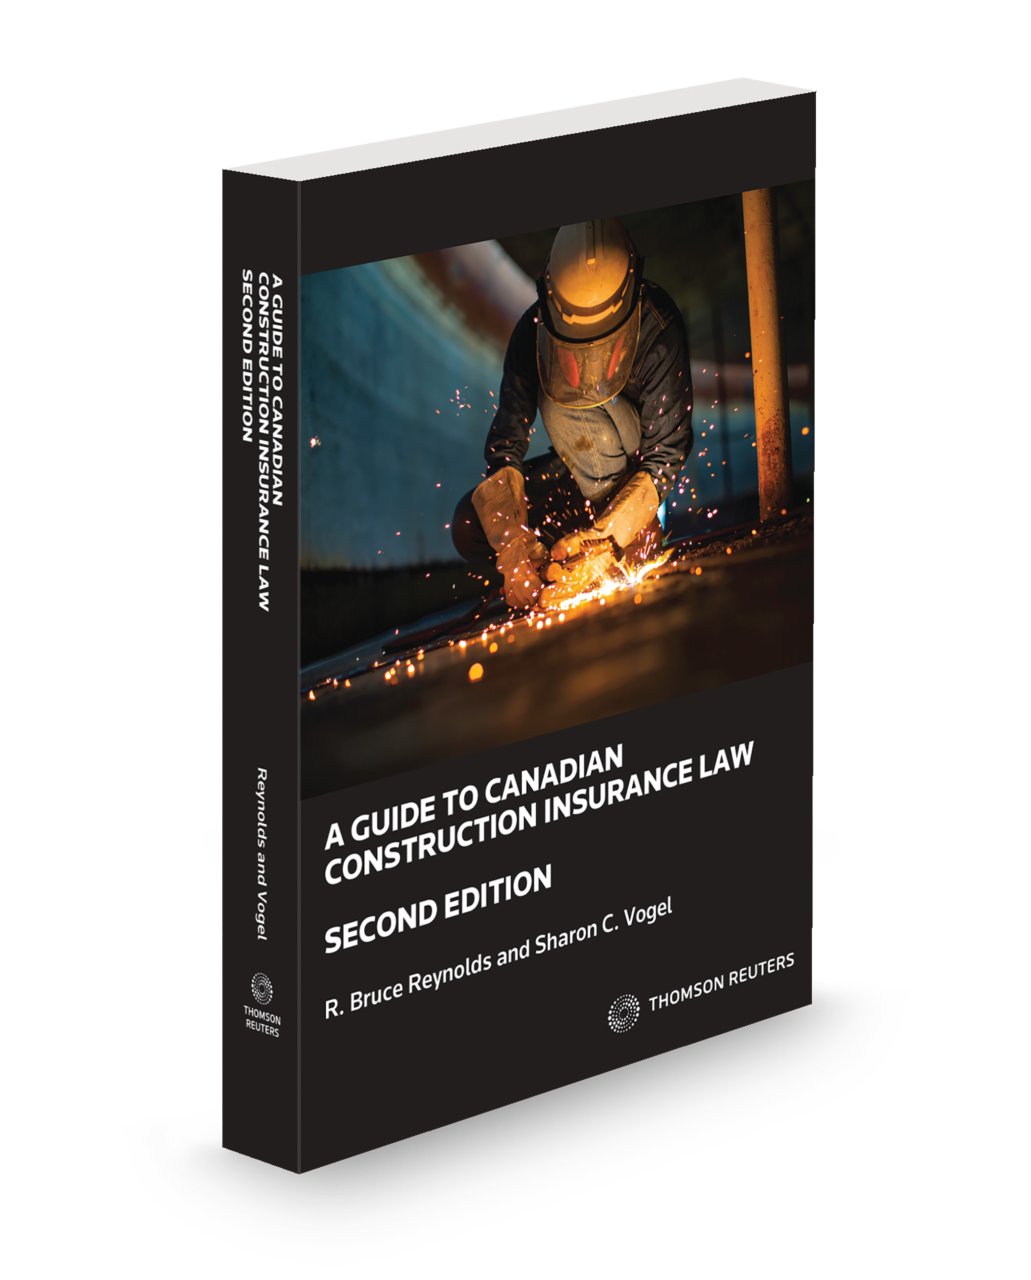 Cover of A Guide to Canadian Construction Insurance Law, 2nd edition